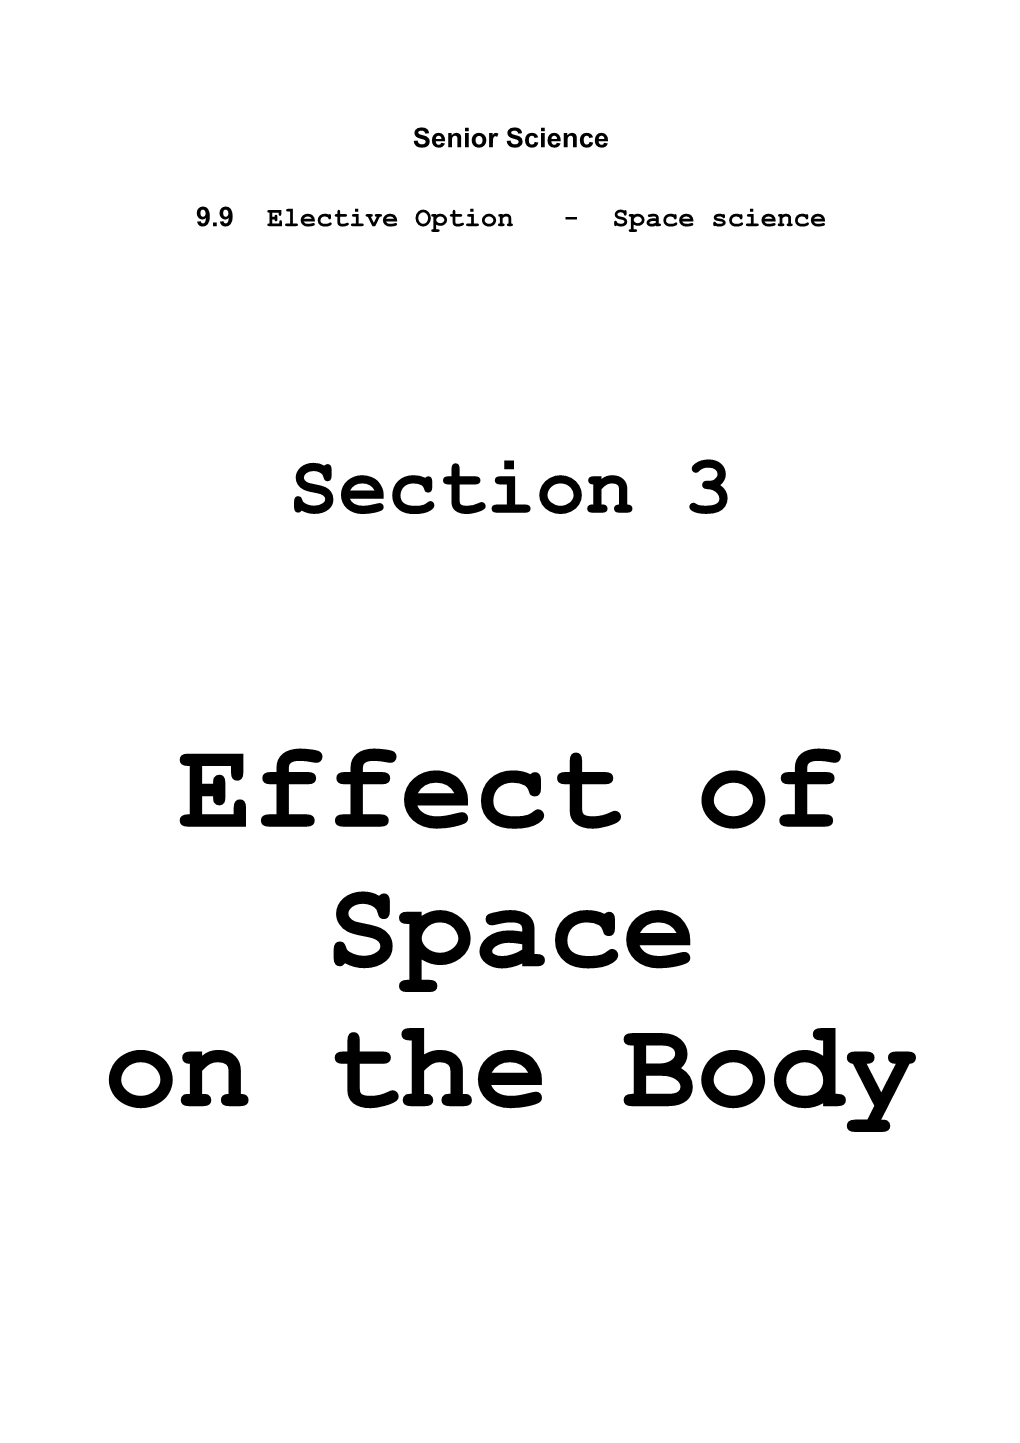 9.9 Elective Option - Space Science